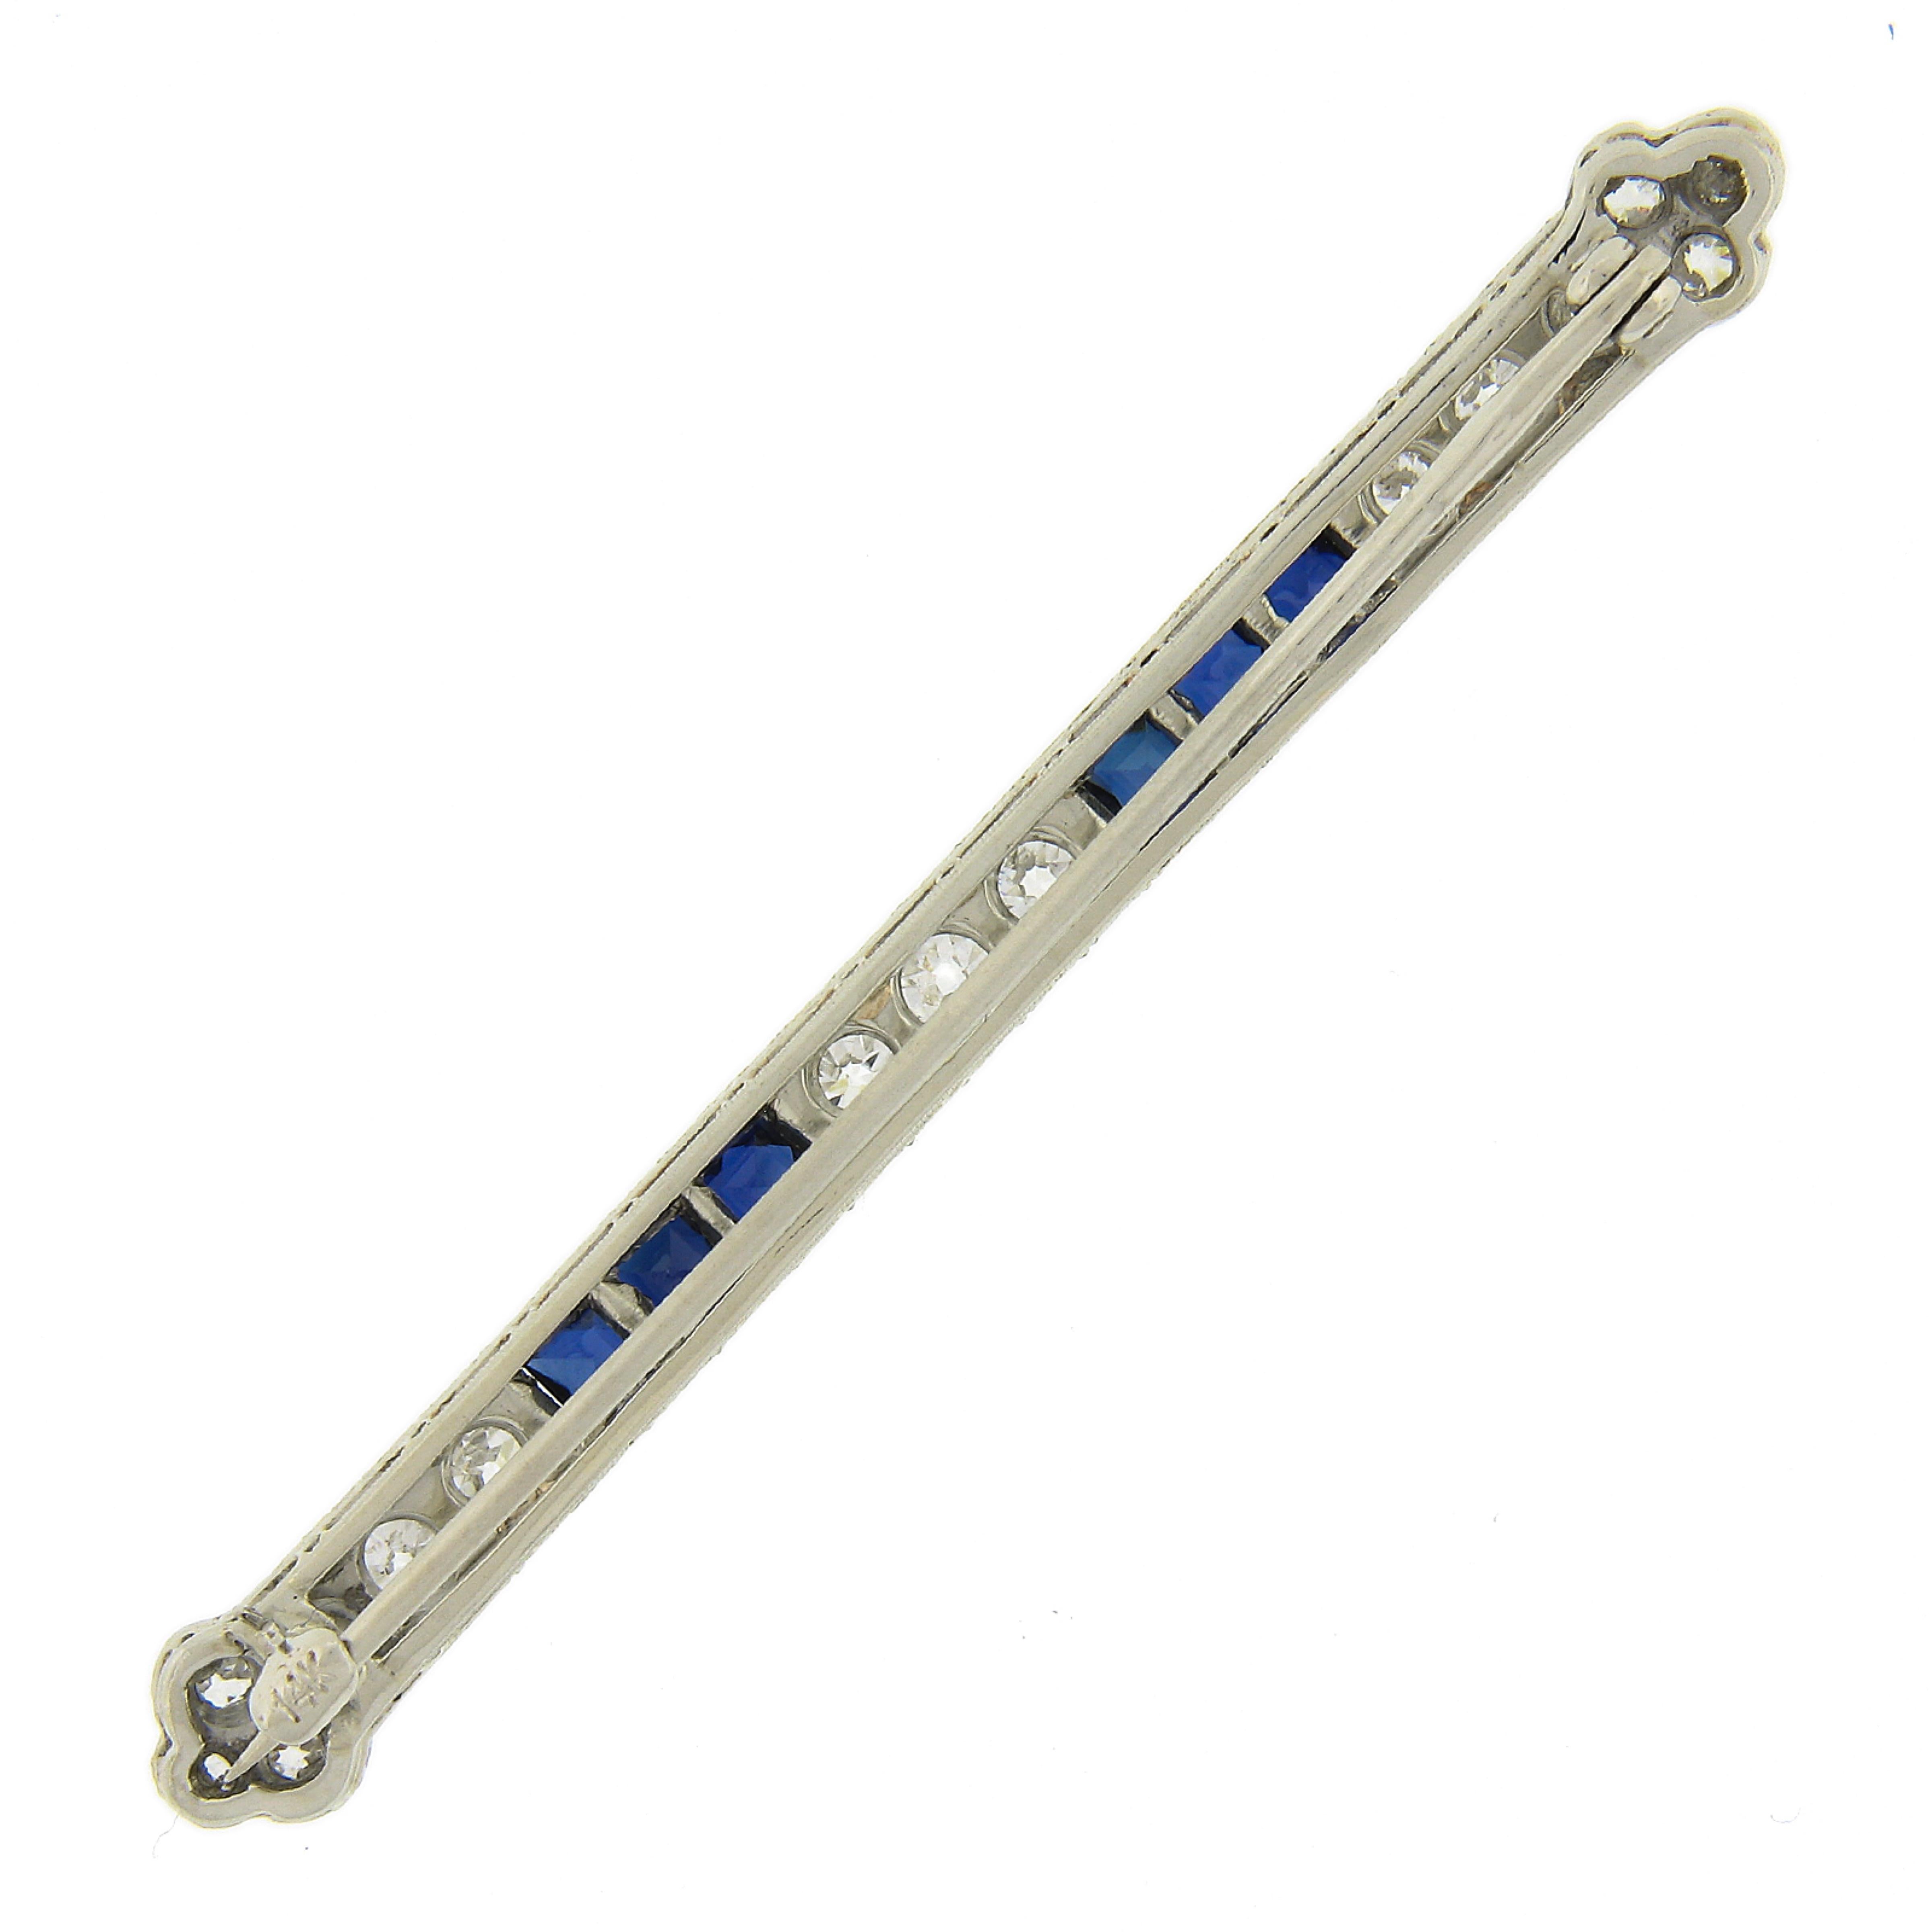 This magnificent, all original, antique bar pin brooch was crafted from solid 14k white gold during the Art Deco period and features 15 natural diamonds and 6 lab-grown sapphires of which two were randomly selected for certification by GIA. The